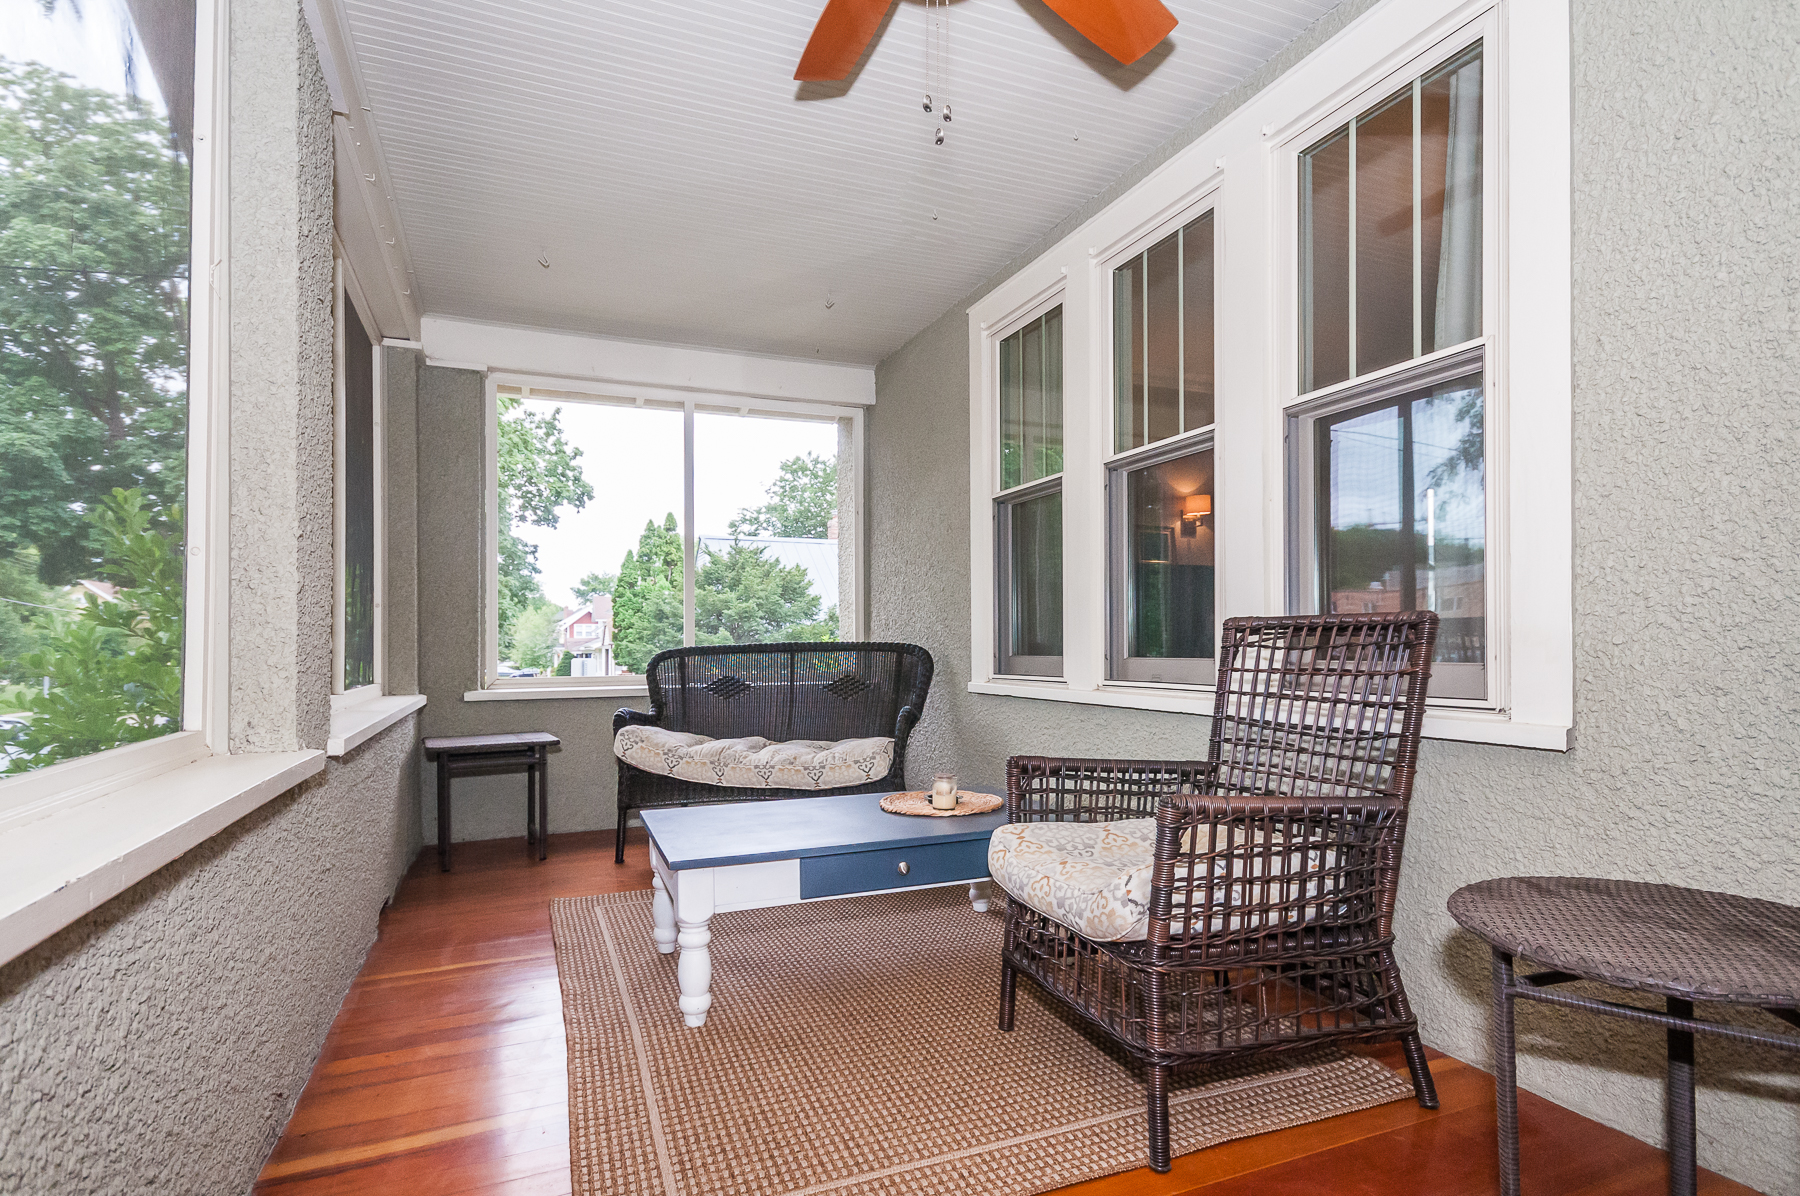 Front porch: Enjoy the fresh air on the screened in porch